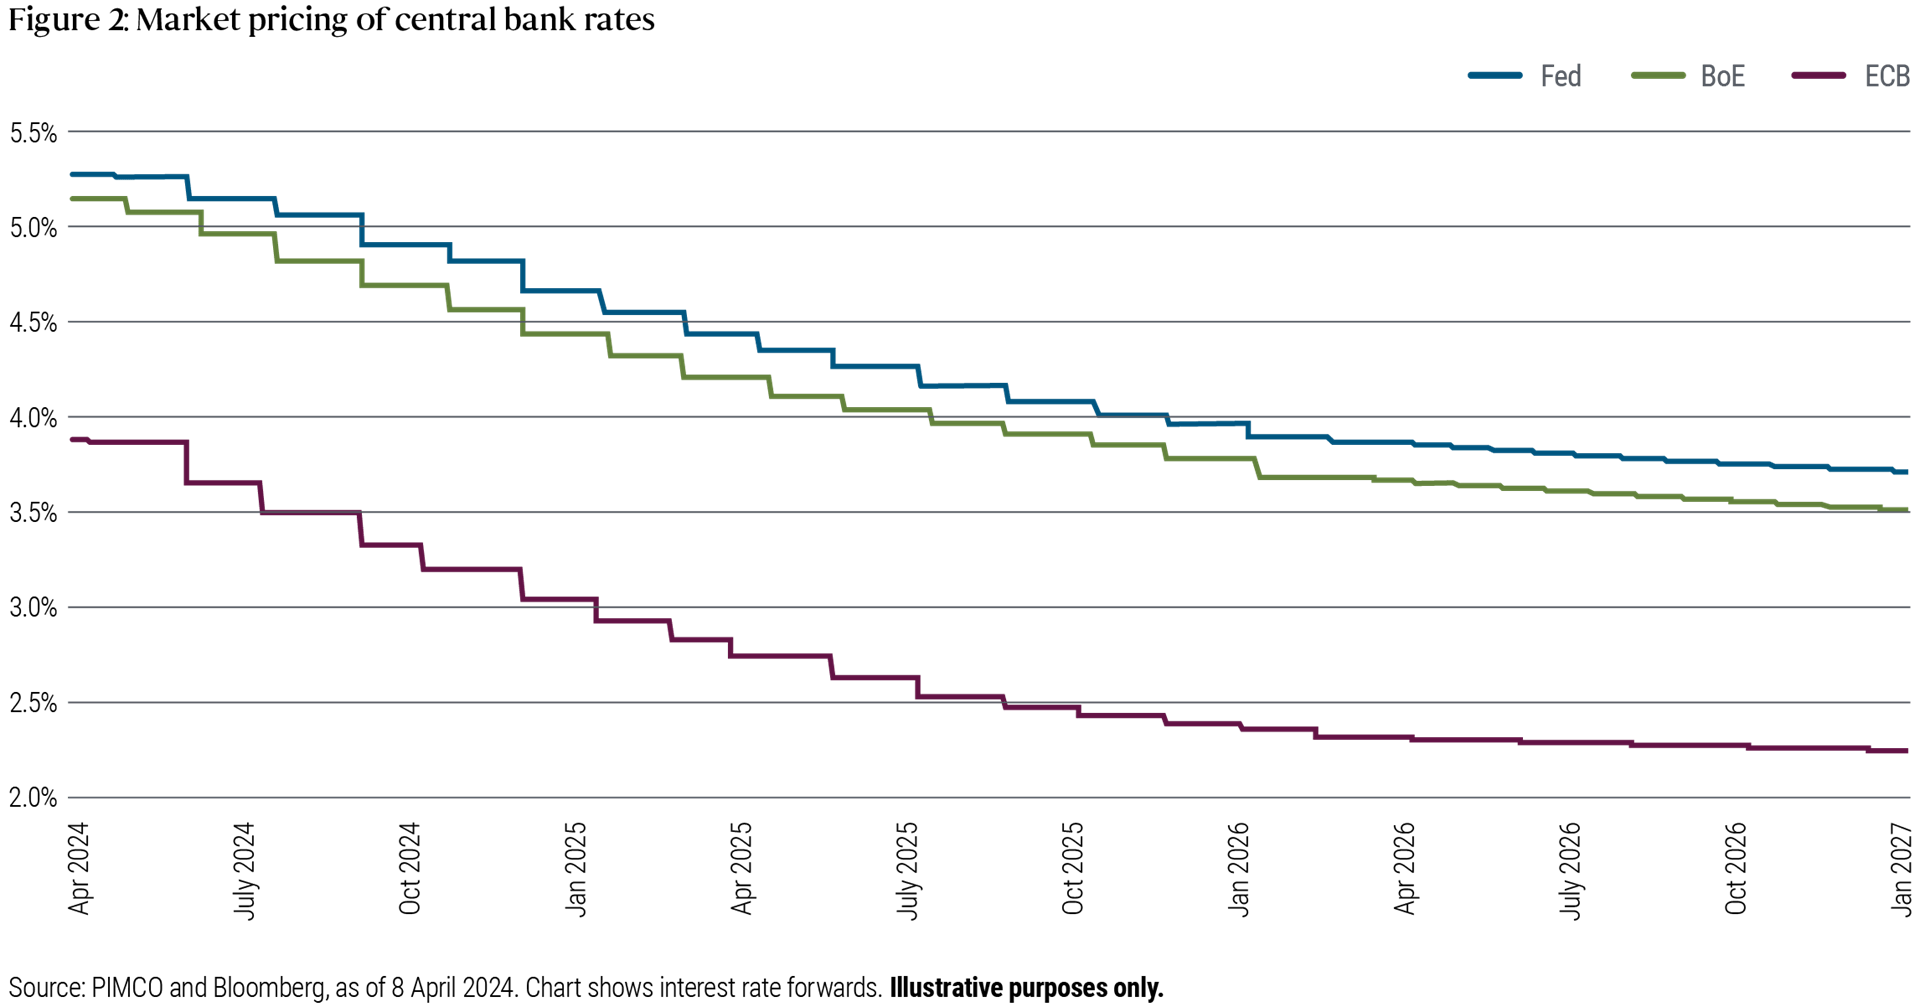 Figure 2 shows the market pricing or expectations of central bank interest rates in the US, UK and eurozone, as measured by interest rate forwards. It shows that expectations for the trajectory of Federal Reserve and Bank of England rates are very similar, falling along similar paths, from around 5.1%-5.25% in April 2024 to 4%-4.25% by January 2027. Expectations for the European Central Bank follow a similar path, but from a lower base of just under 4% in April 2024 to 2.25% by January 2027.